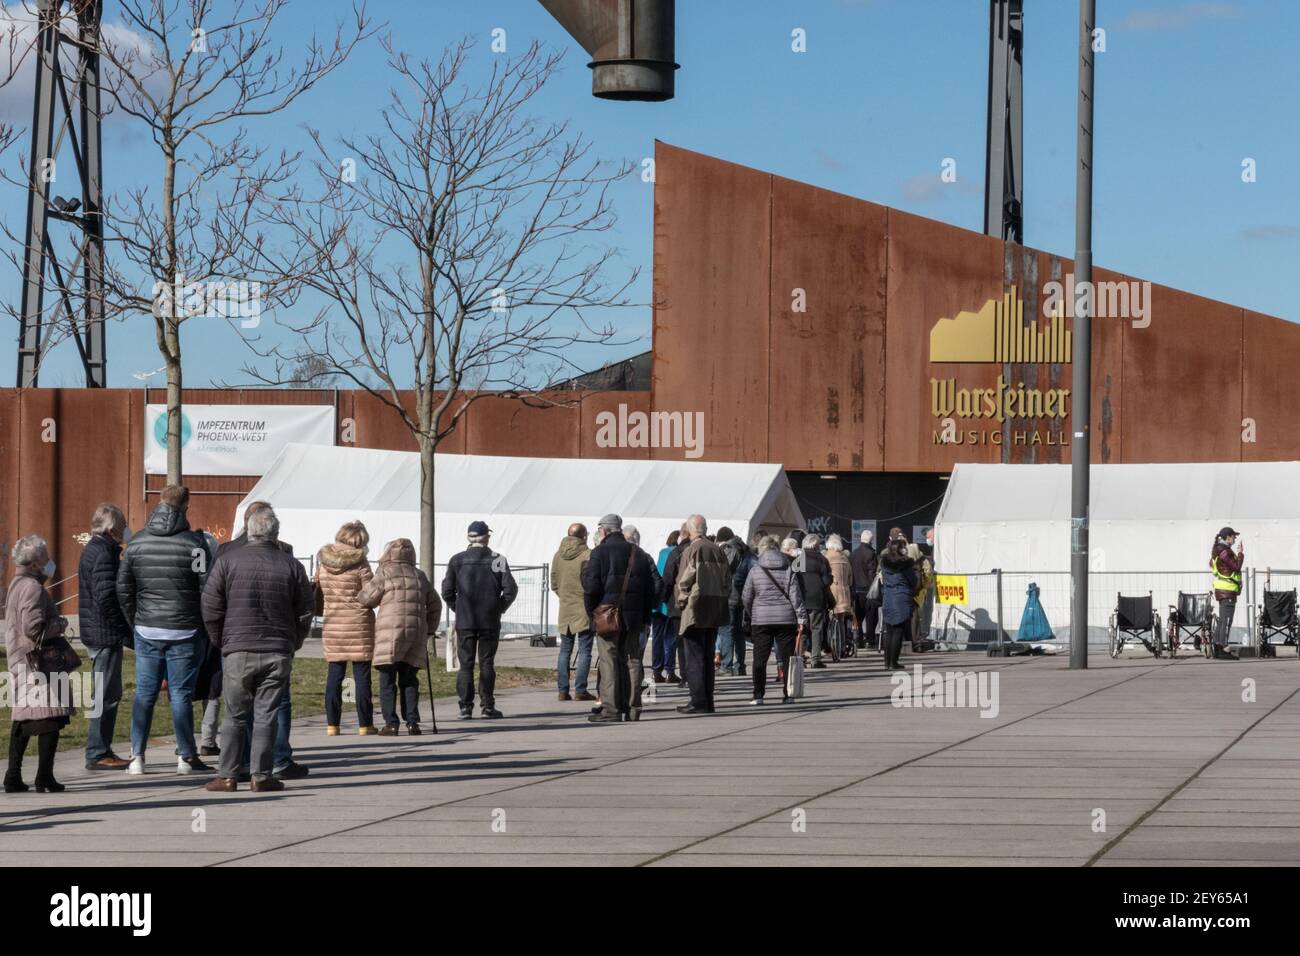 Dortmund, NRW, Germany, 05th Mar 2021. An orderly queue of people with appointments has formed outside the centre. Signage and directions to Impfzentrum Phoenix-West. Phoenix West, a former blast furnace and industrial site now housing culture and music venues is currently Dortmund's largest and busiest vaccination centre. The vaccination campaign in Germany is picking up momentum. Earlier this week, The German health ministry and vaccination commission STIKO cleared Astra Zeneca's vaccine for use in the over 65 age group. In addition, GP practices can start administering vaccinations soon. A Stock Photo